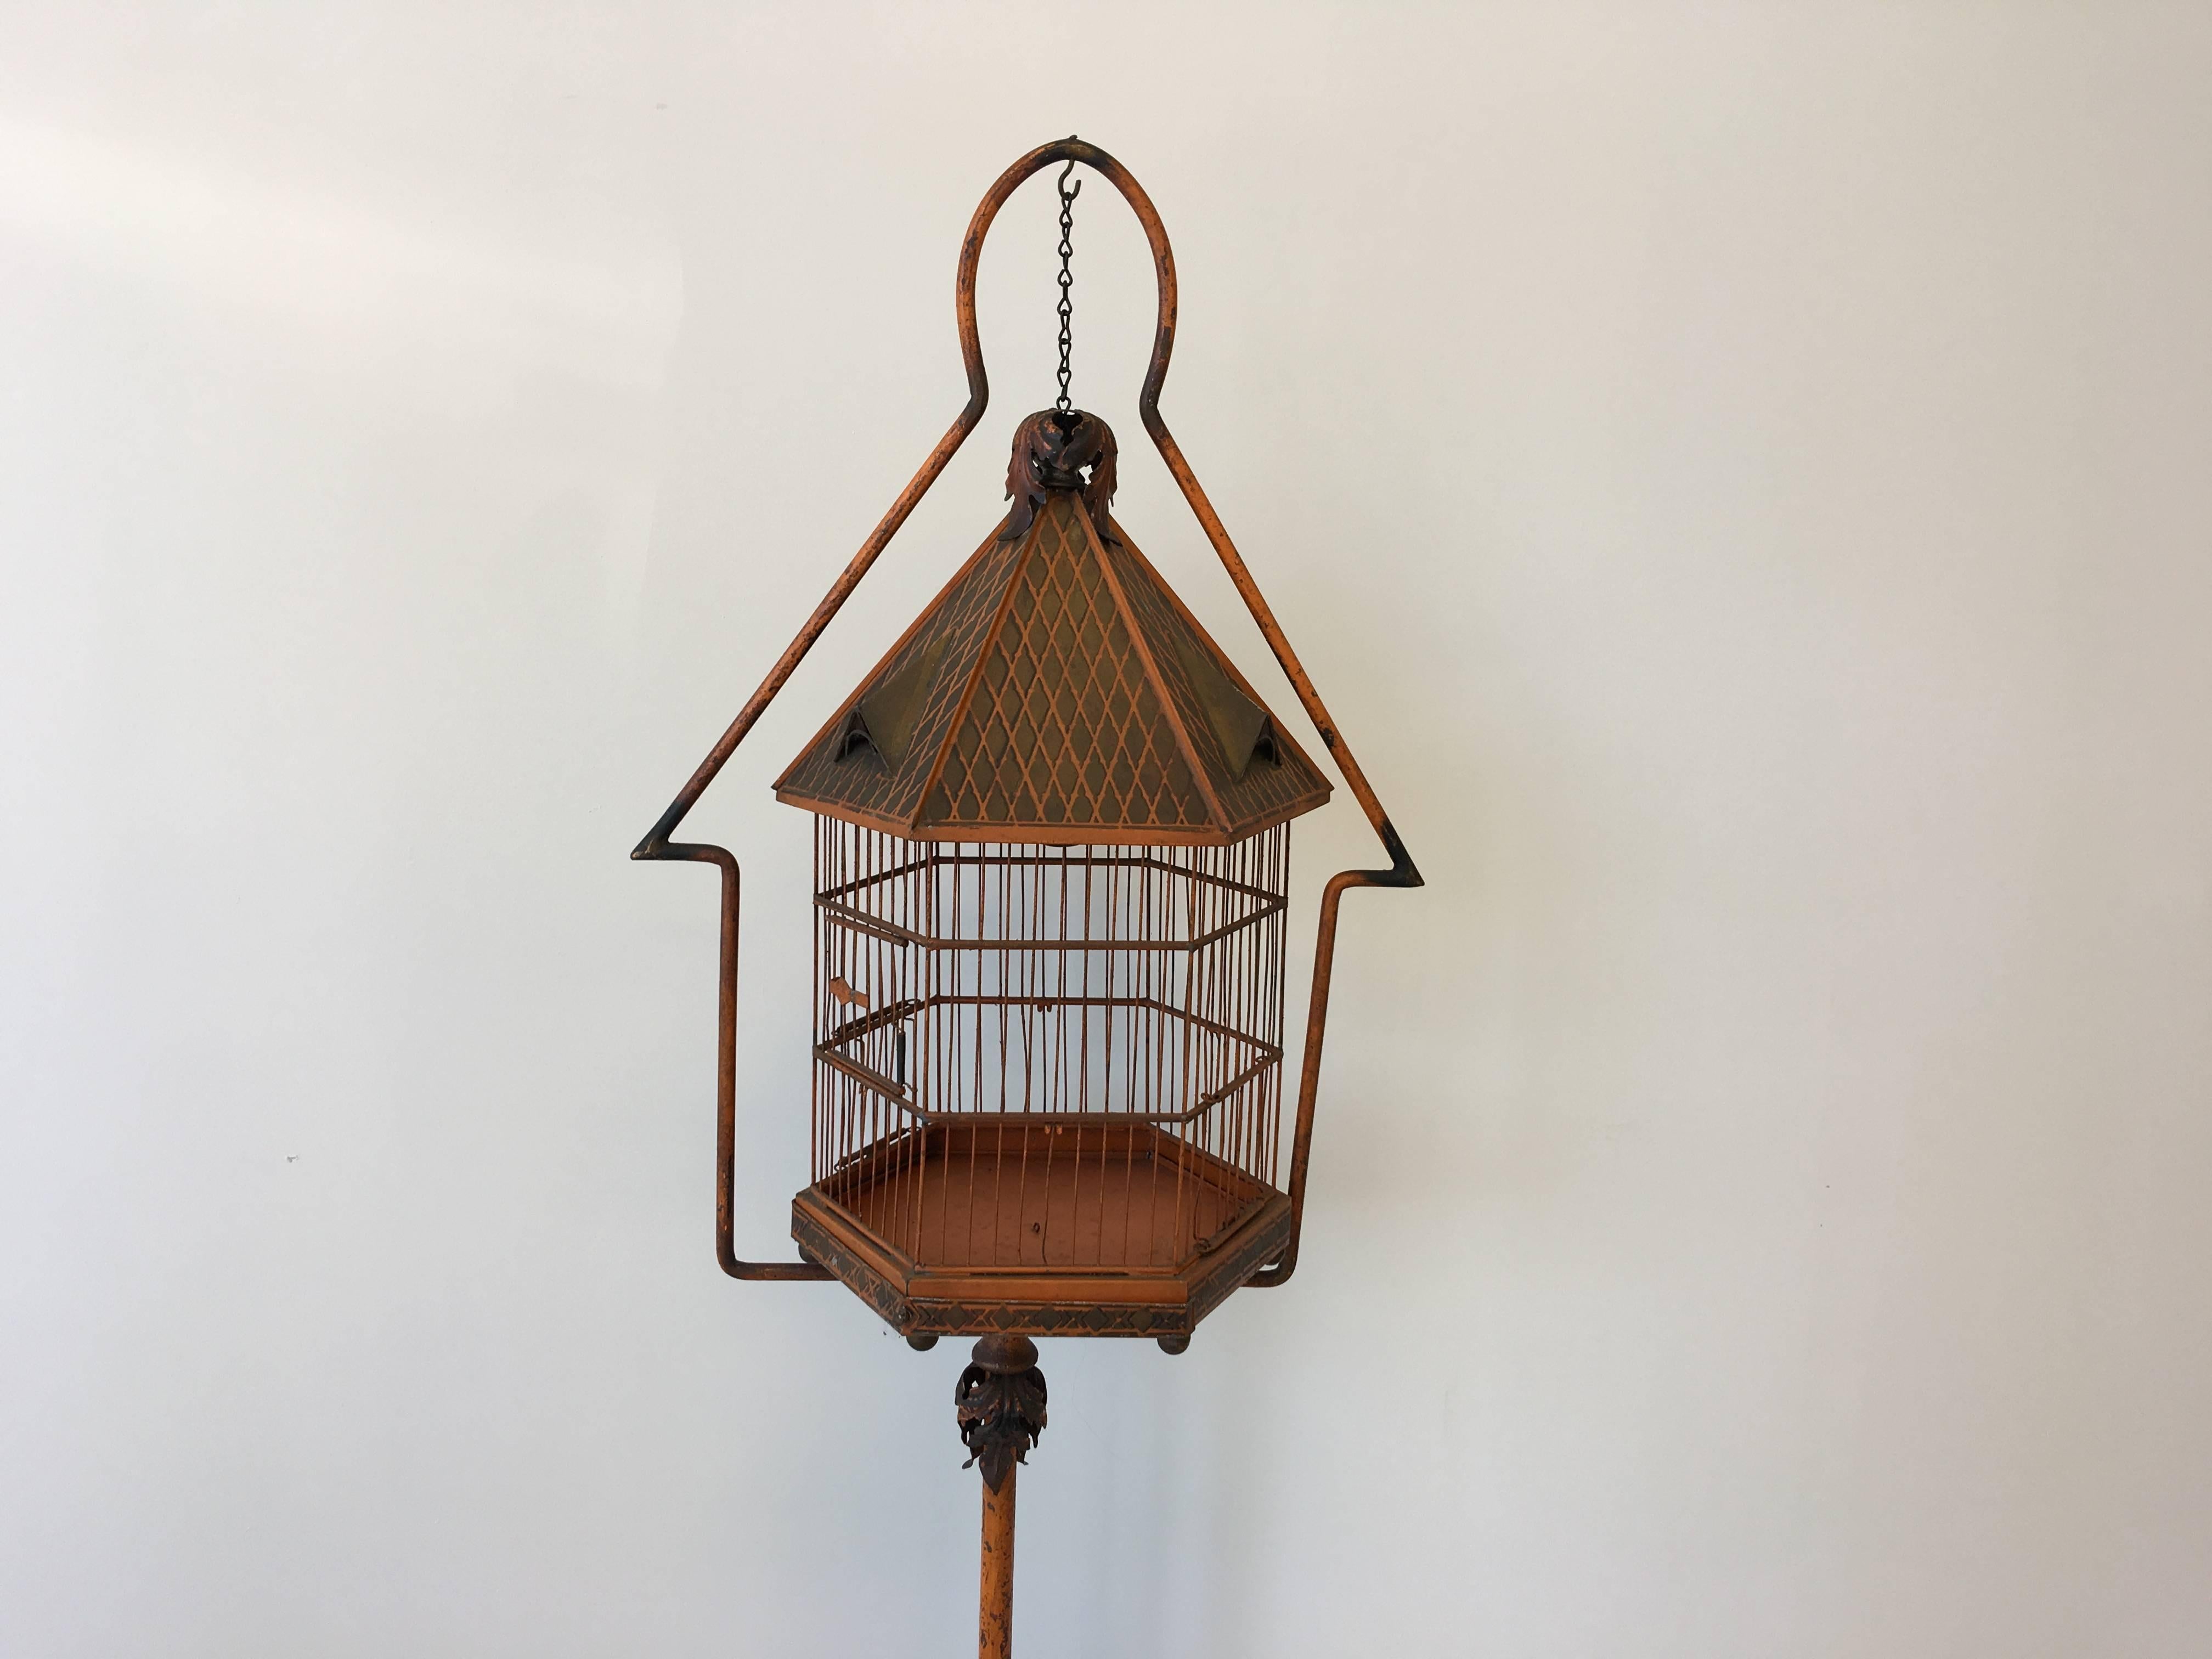 Offered is a beautiful, tole orange and green painted birdcage and stand by P.N.F., circa late 19th century. Made in Czechoslovakia. Features shades of orange, green, and black. Three small windows along the roof, great fretwork along the base, and